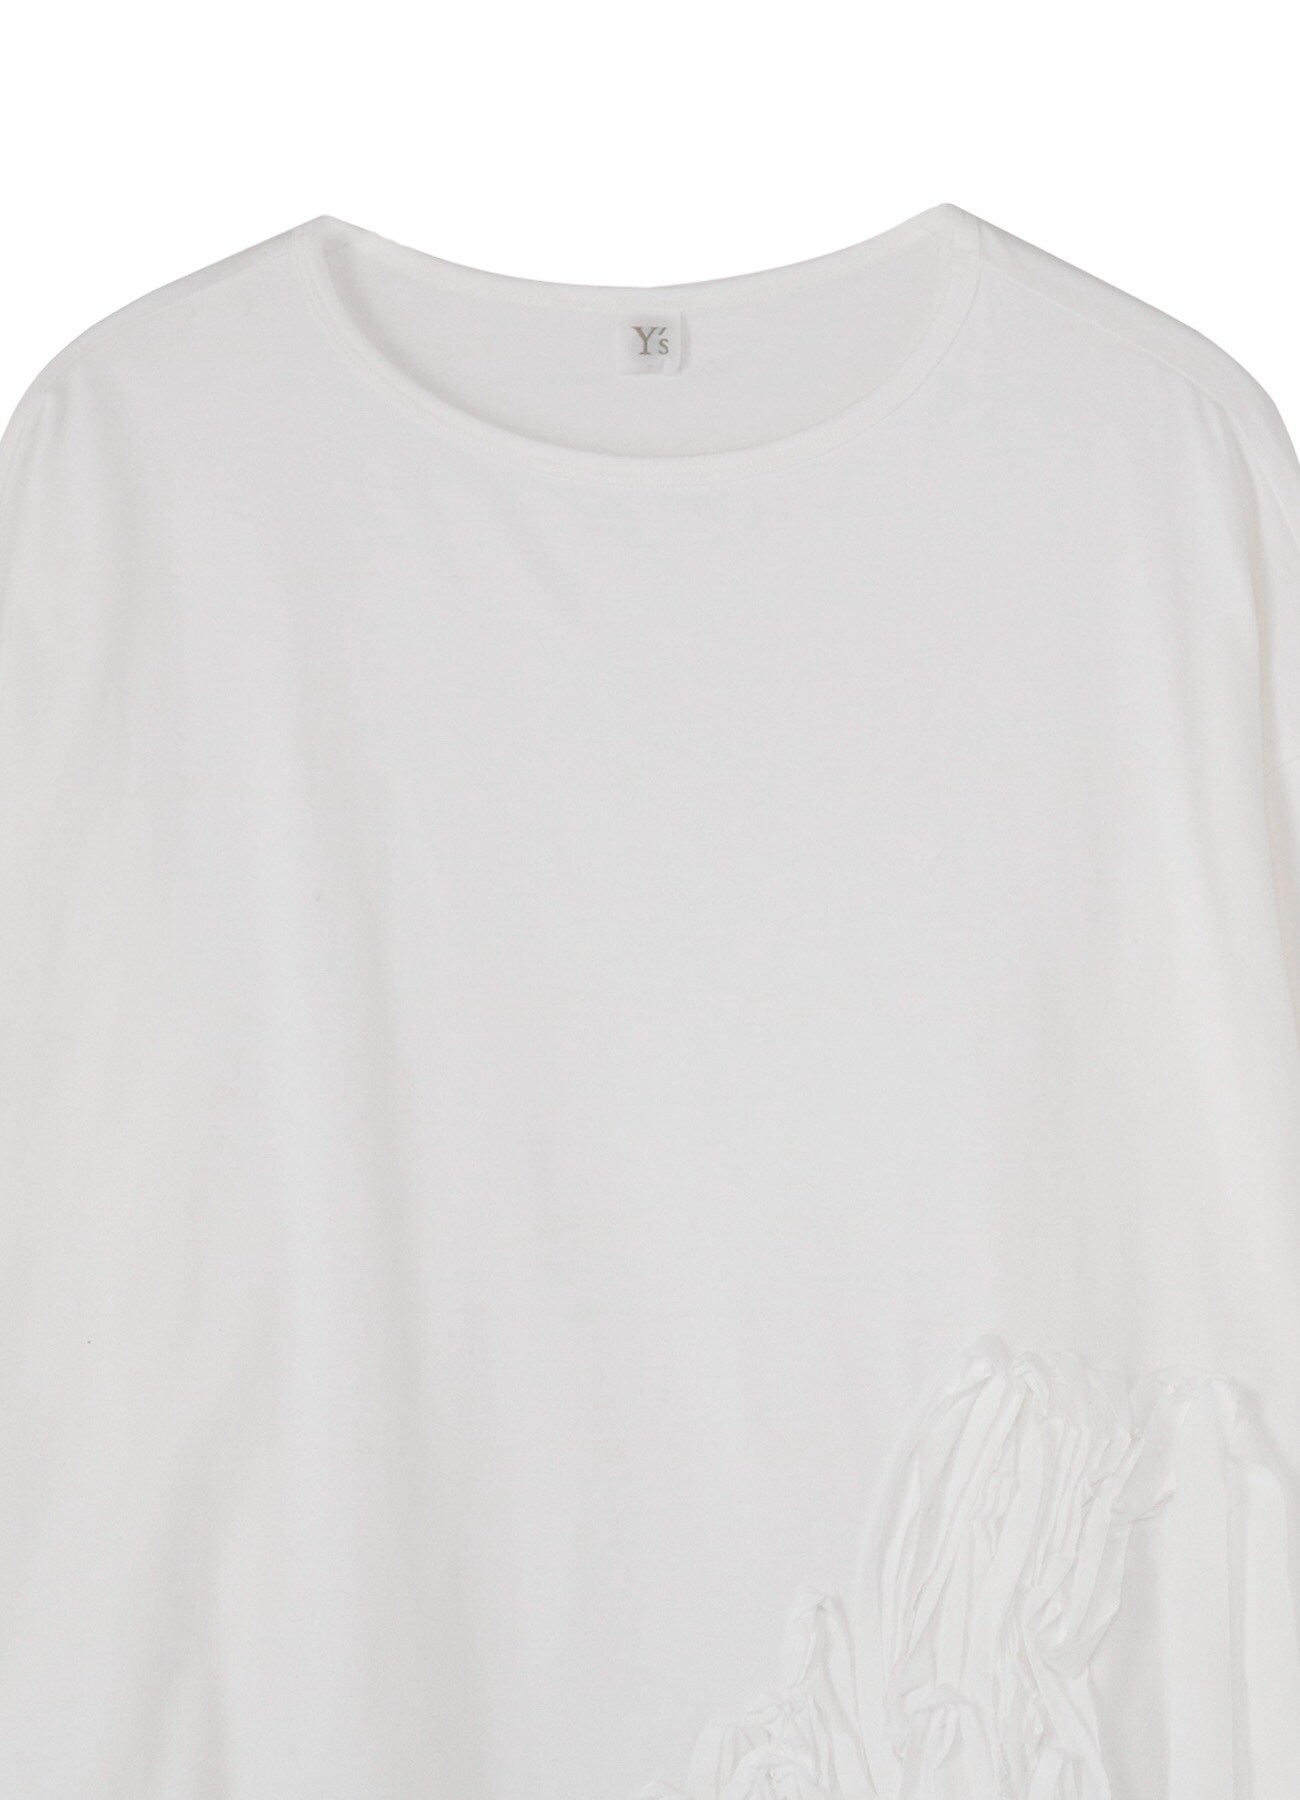 CORD EMBROIDERY BOAT NECK BIG T-SHIRT